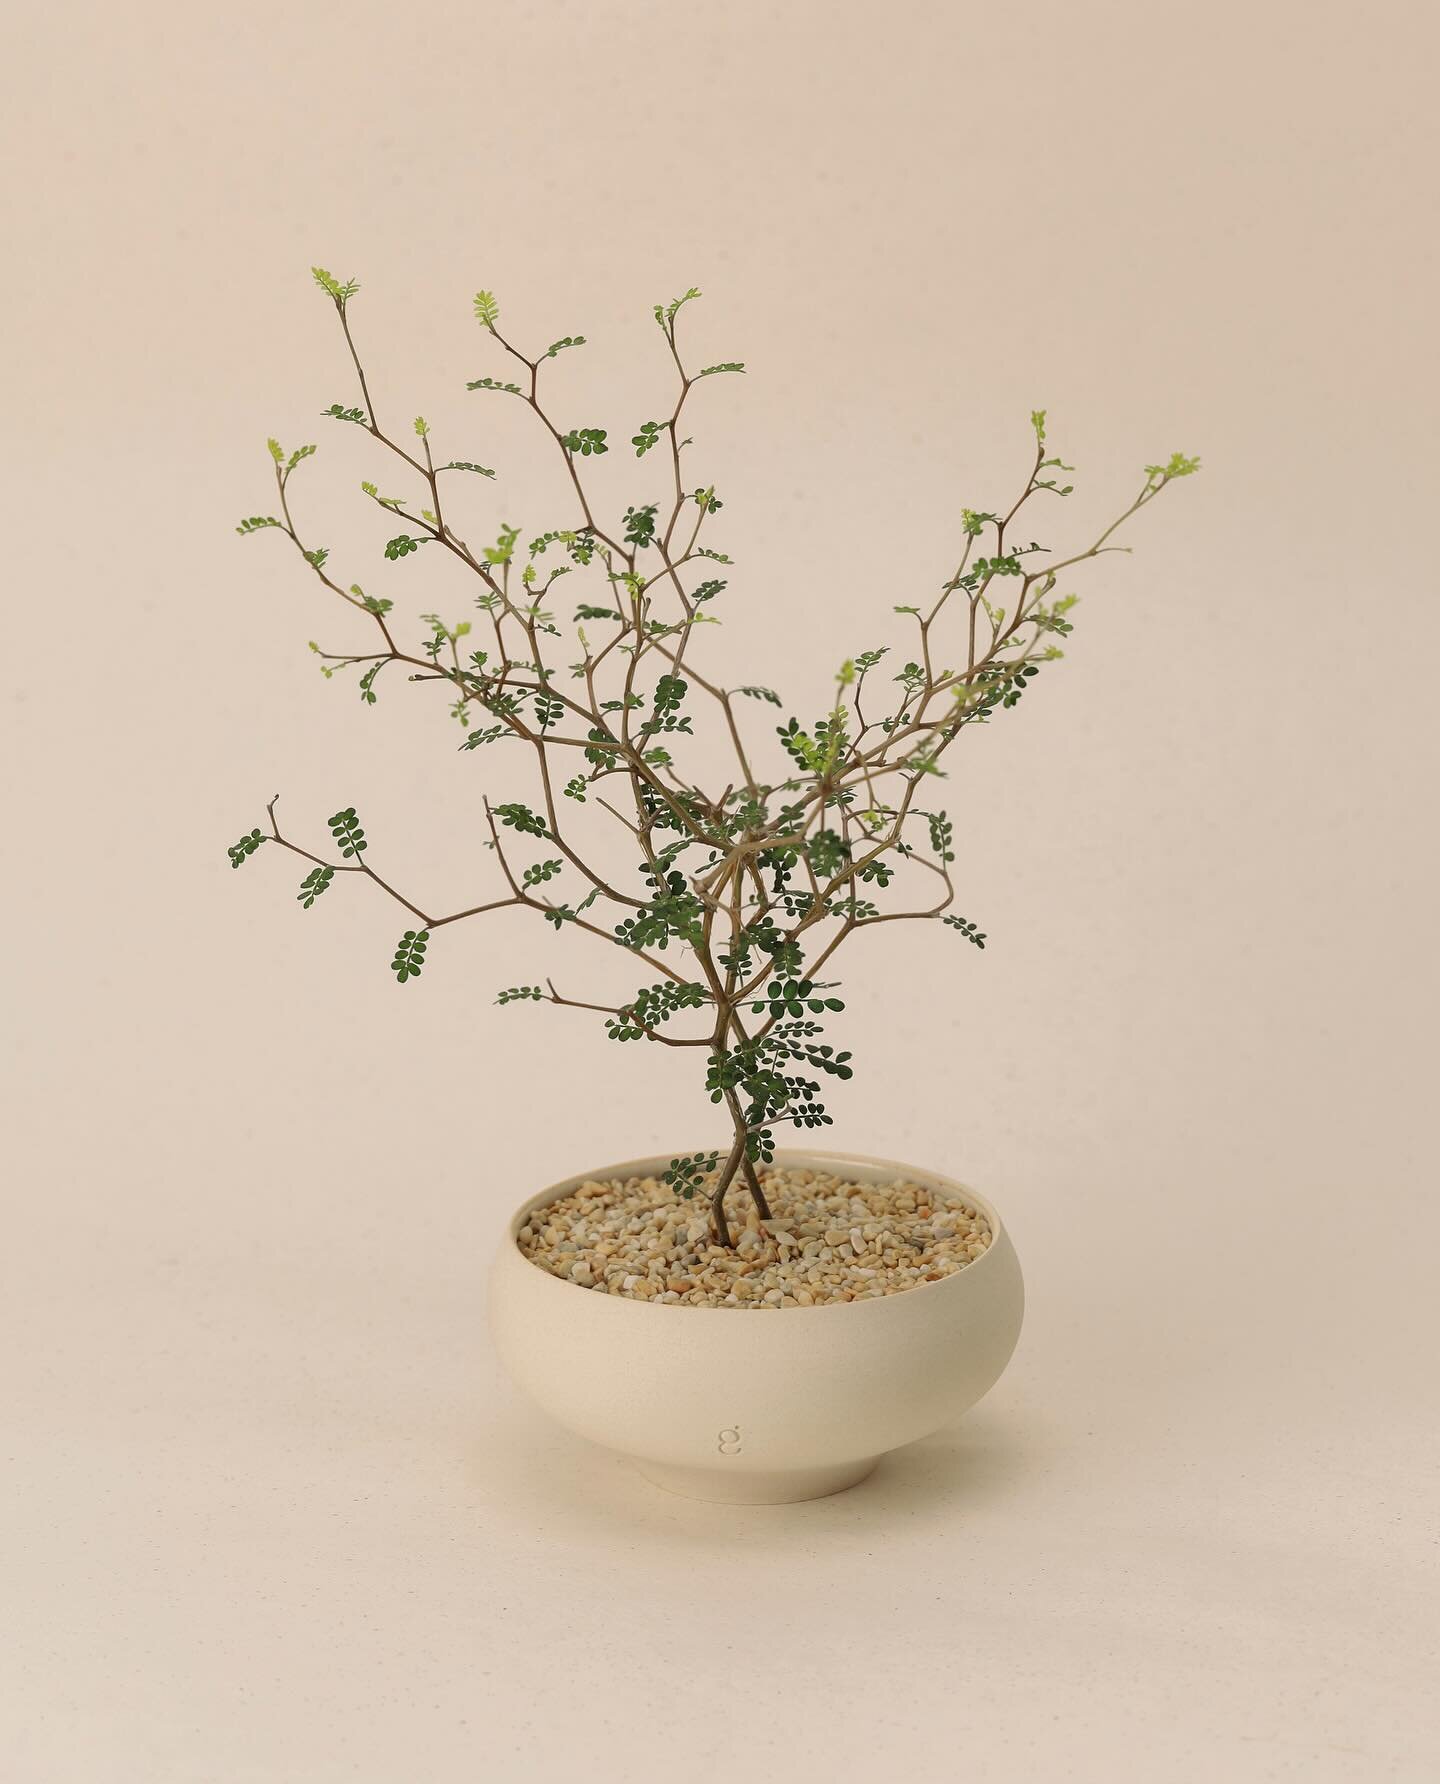 Sophora prostrata &lsquo;Little Baby&rsquo; from Japan remains one of our most iconic plant ever since we started. Slow-growing and stunning, this plant can be grown in direct sunlight, maintaining its adorable small leaves! 🌿

Featuring @__gaonyou_